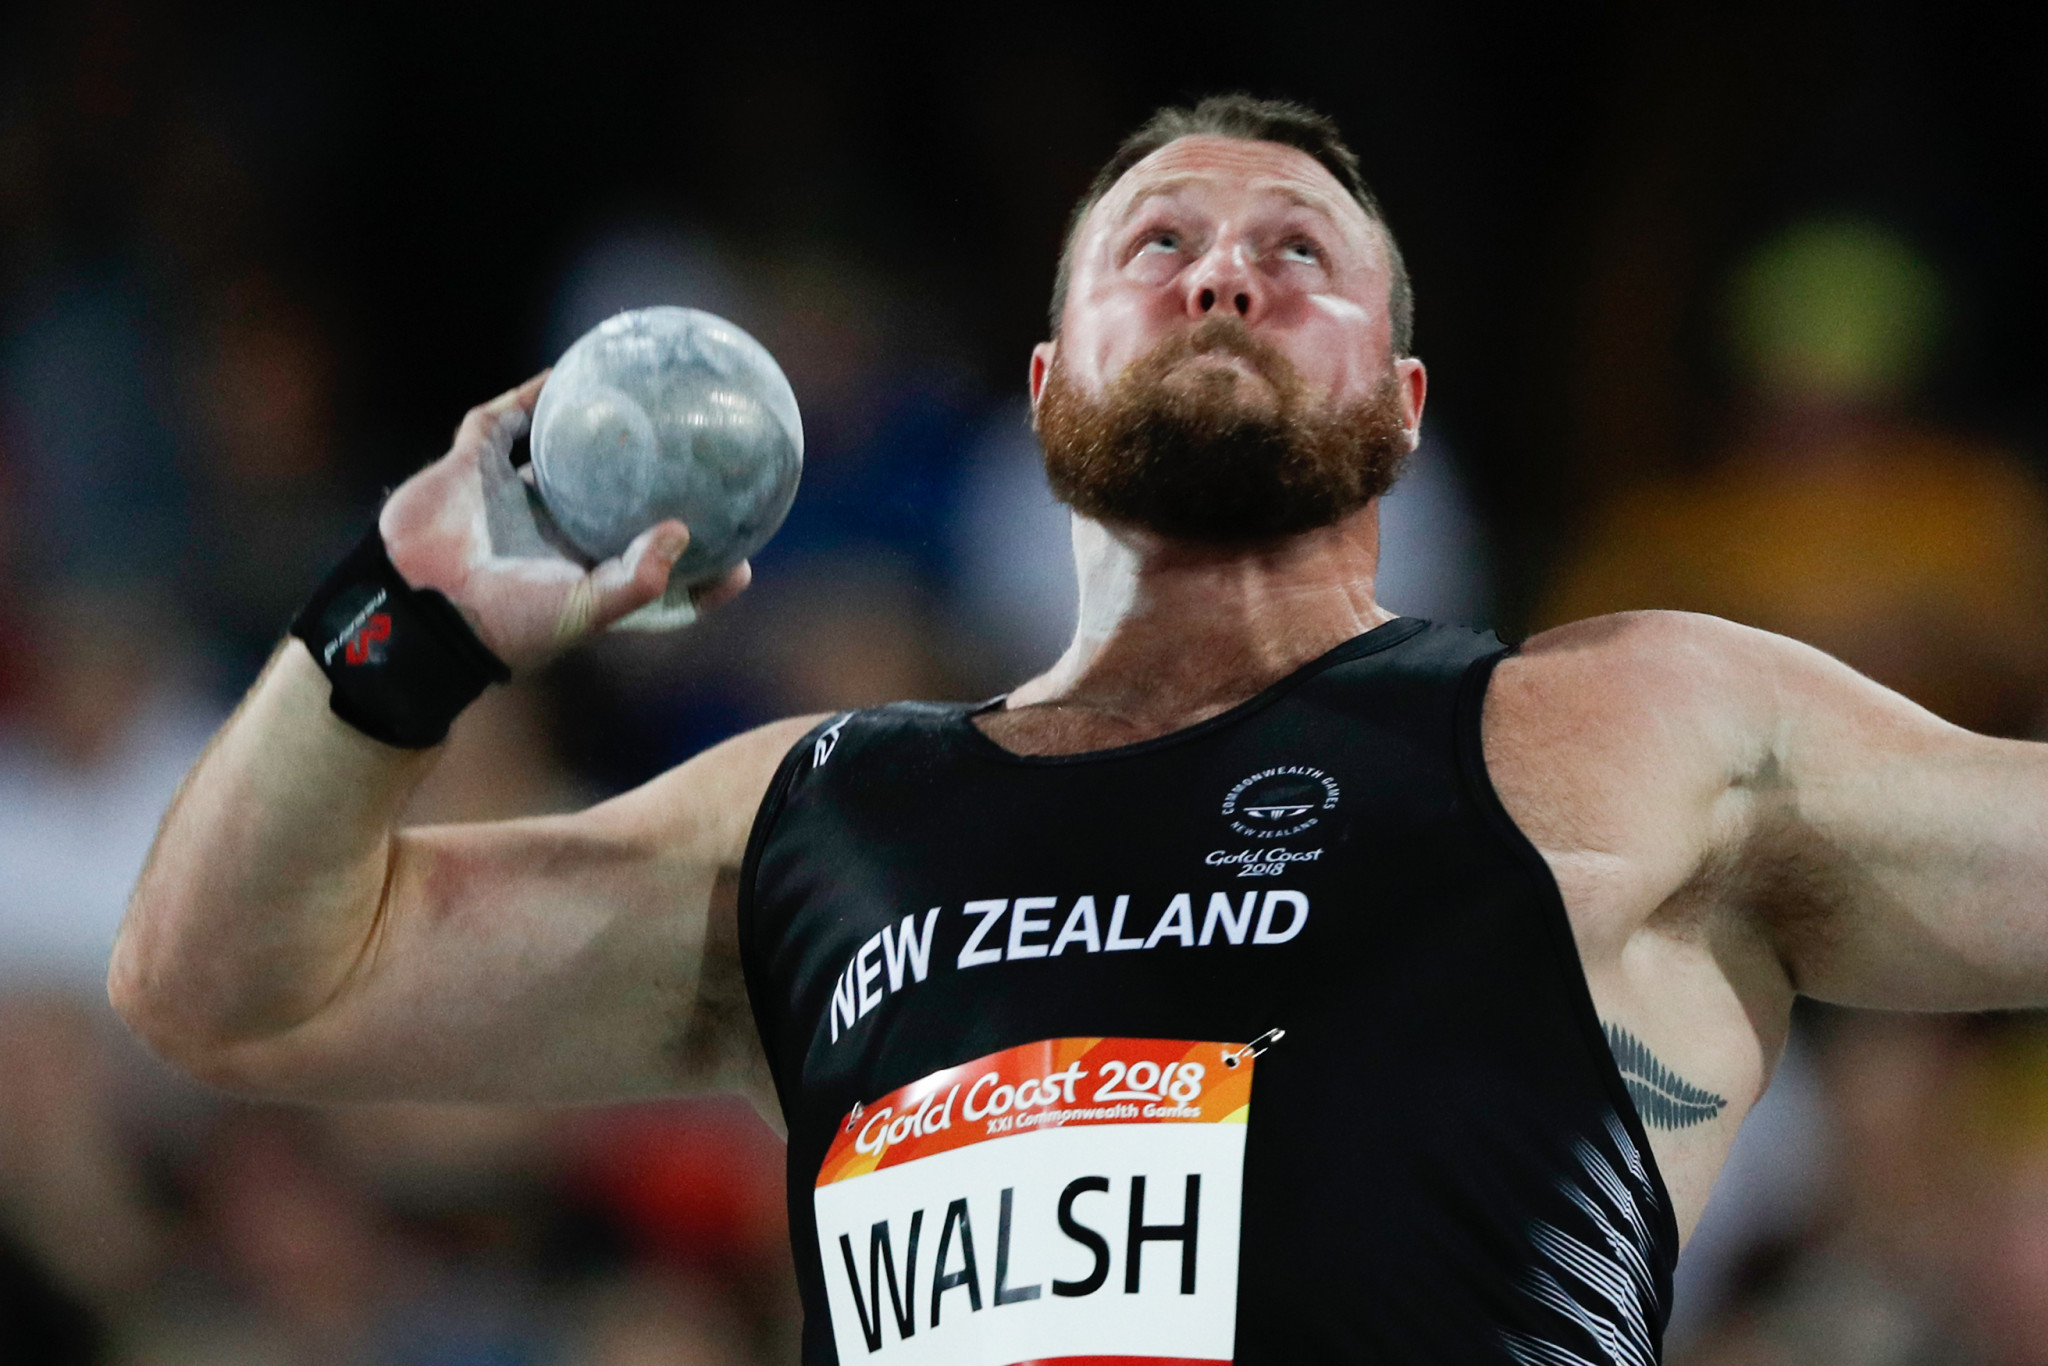 New Zealand's Tomas Walsh won the men's shot put ©Getty Images